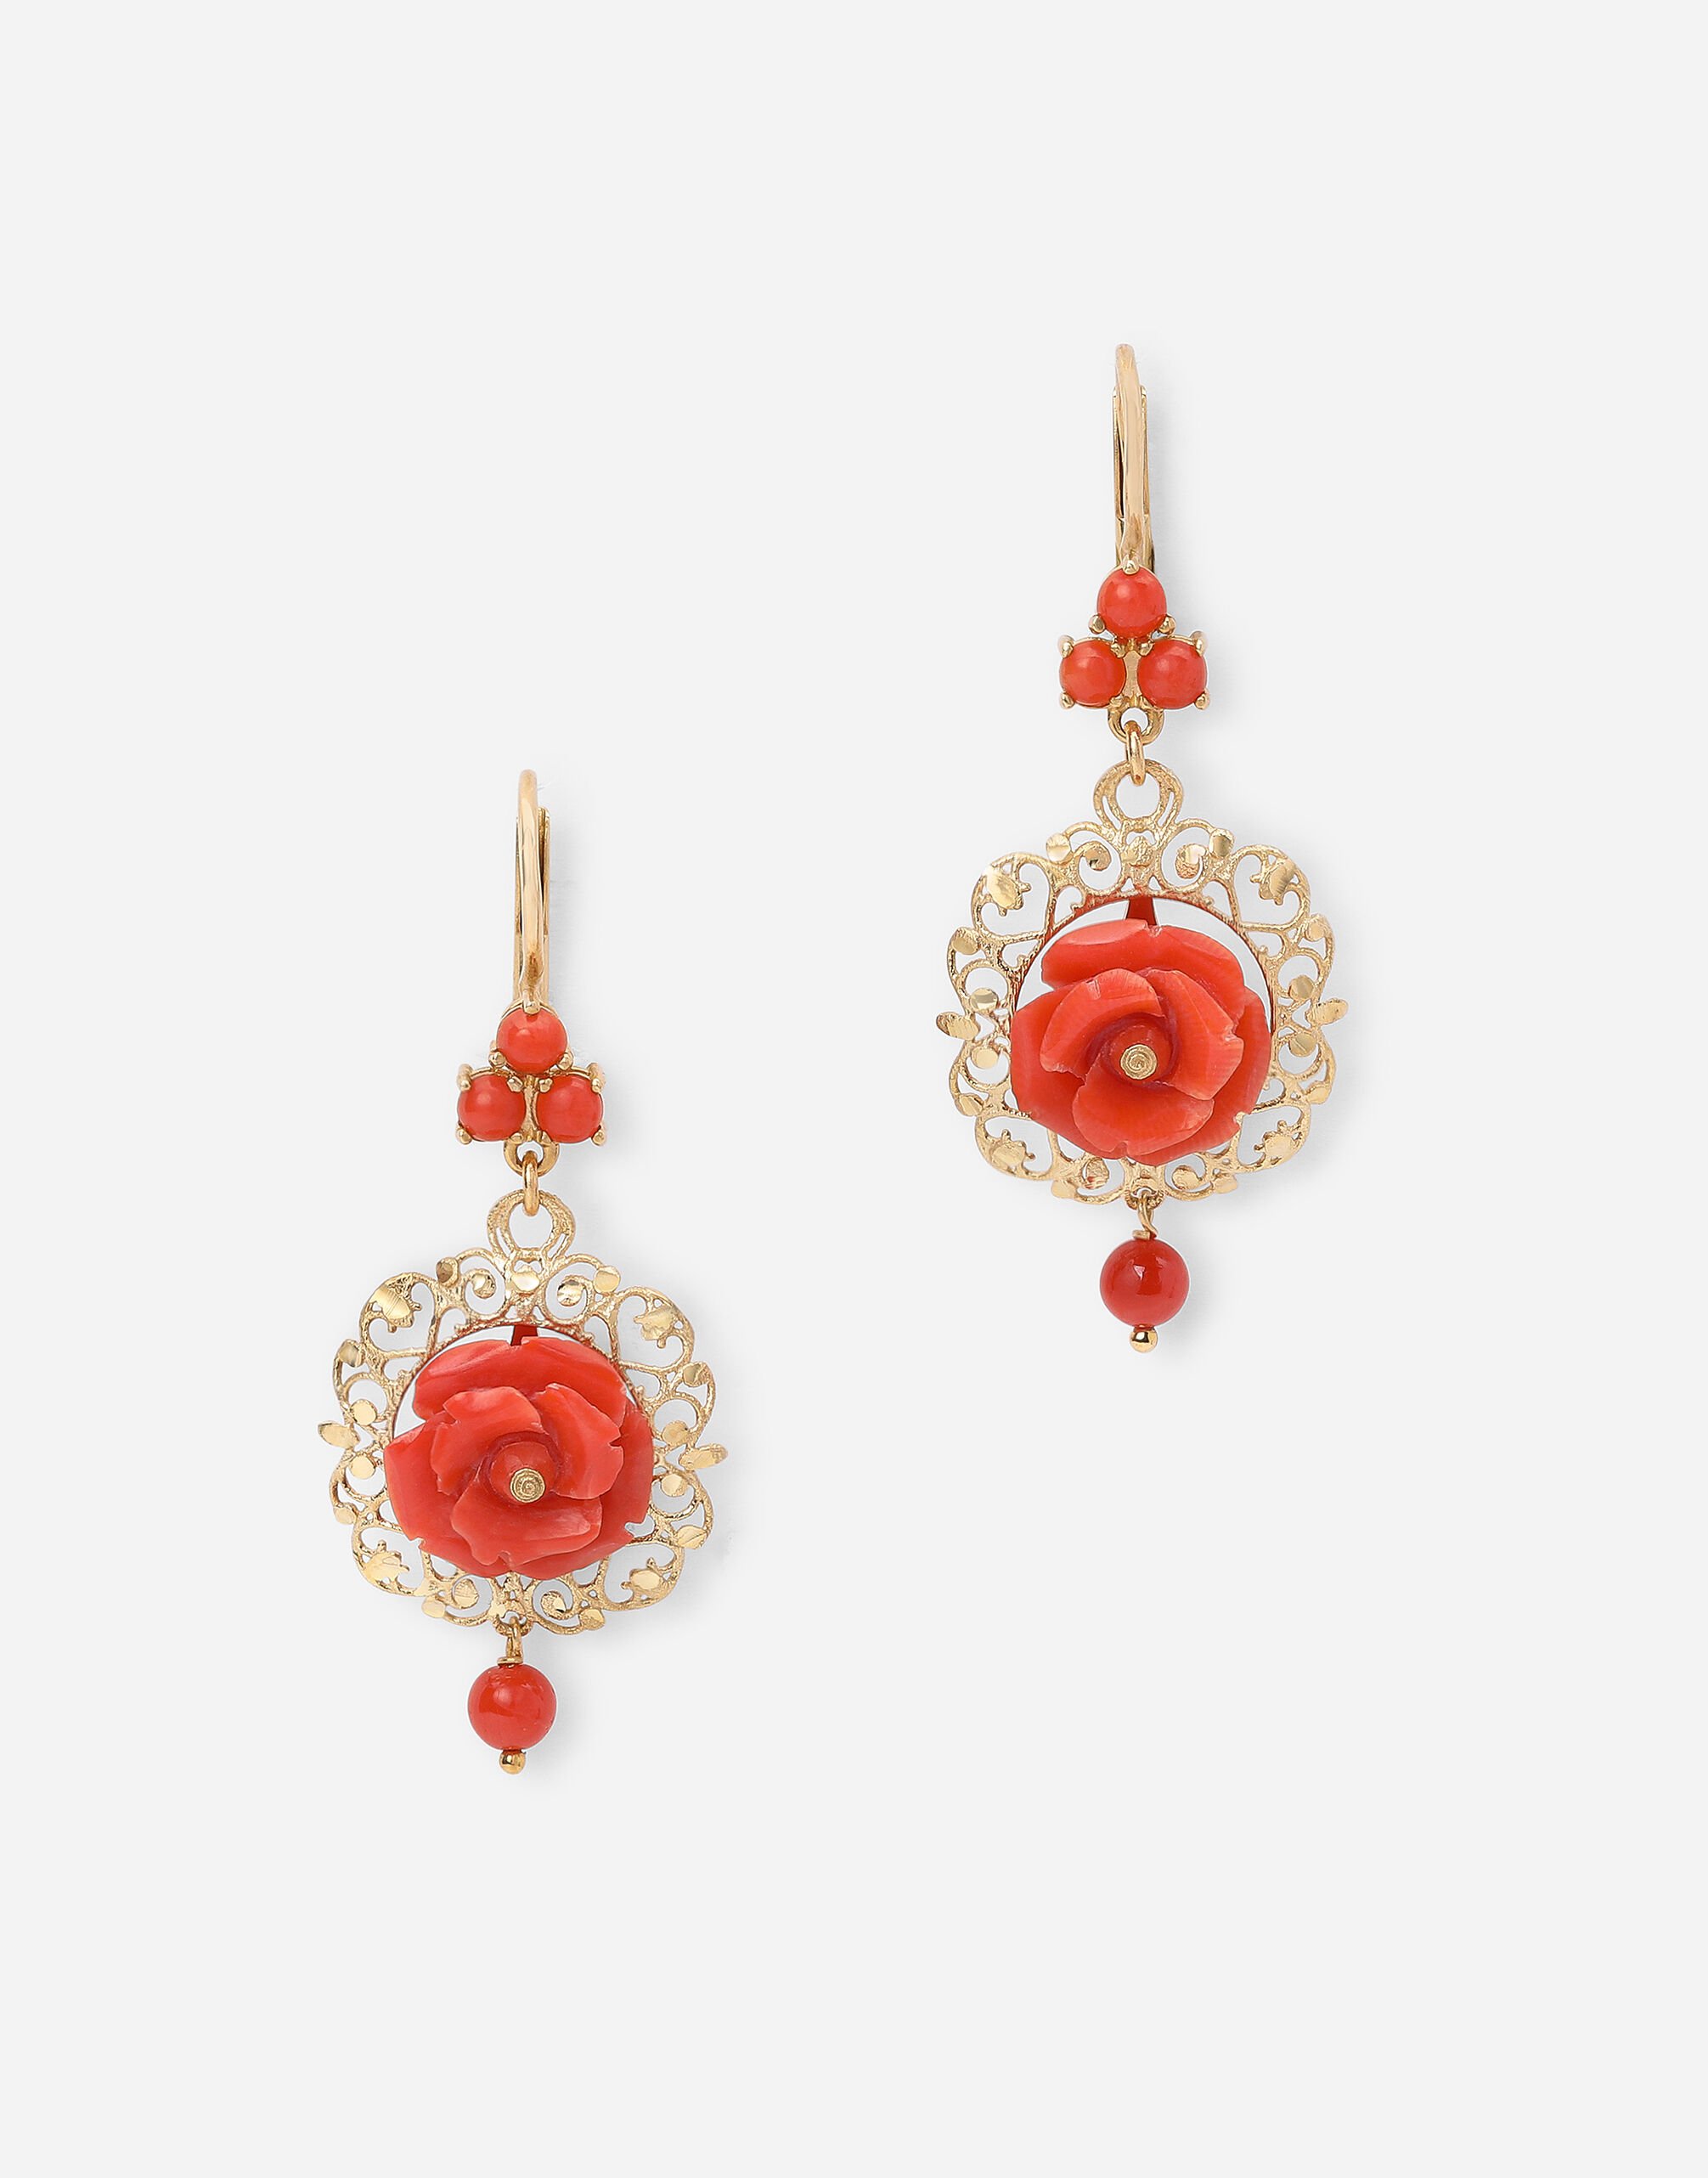 Dolce & Gabbana Coral leverback earrings in yellow 18kt gold with coral roses Gold WALK5GWYE01